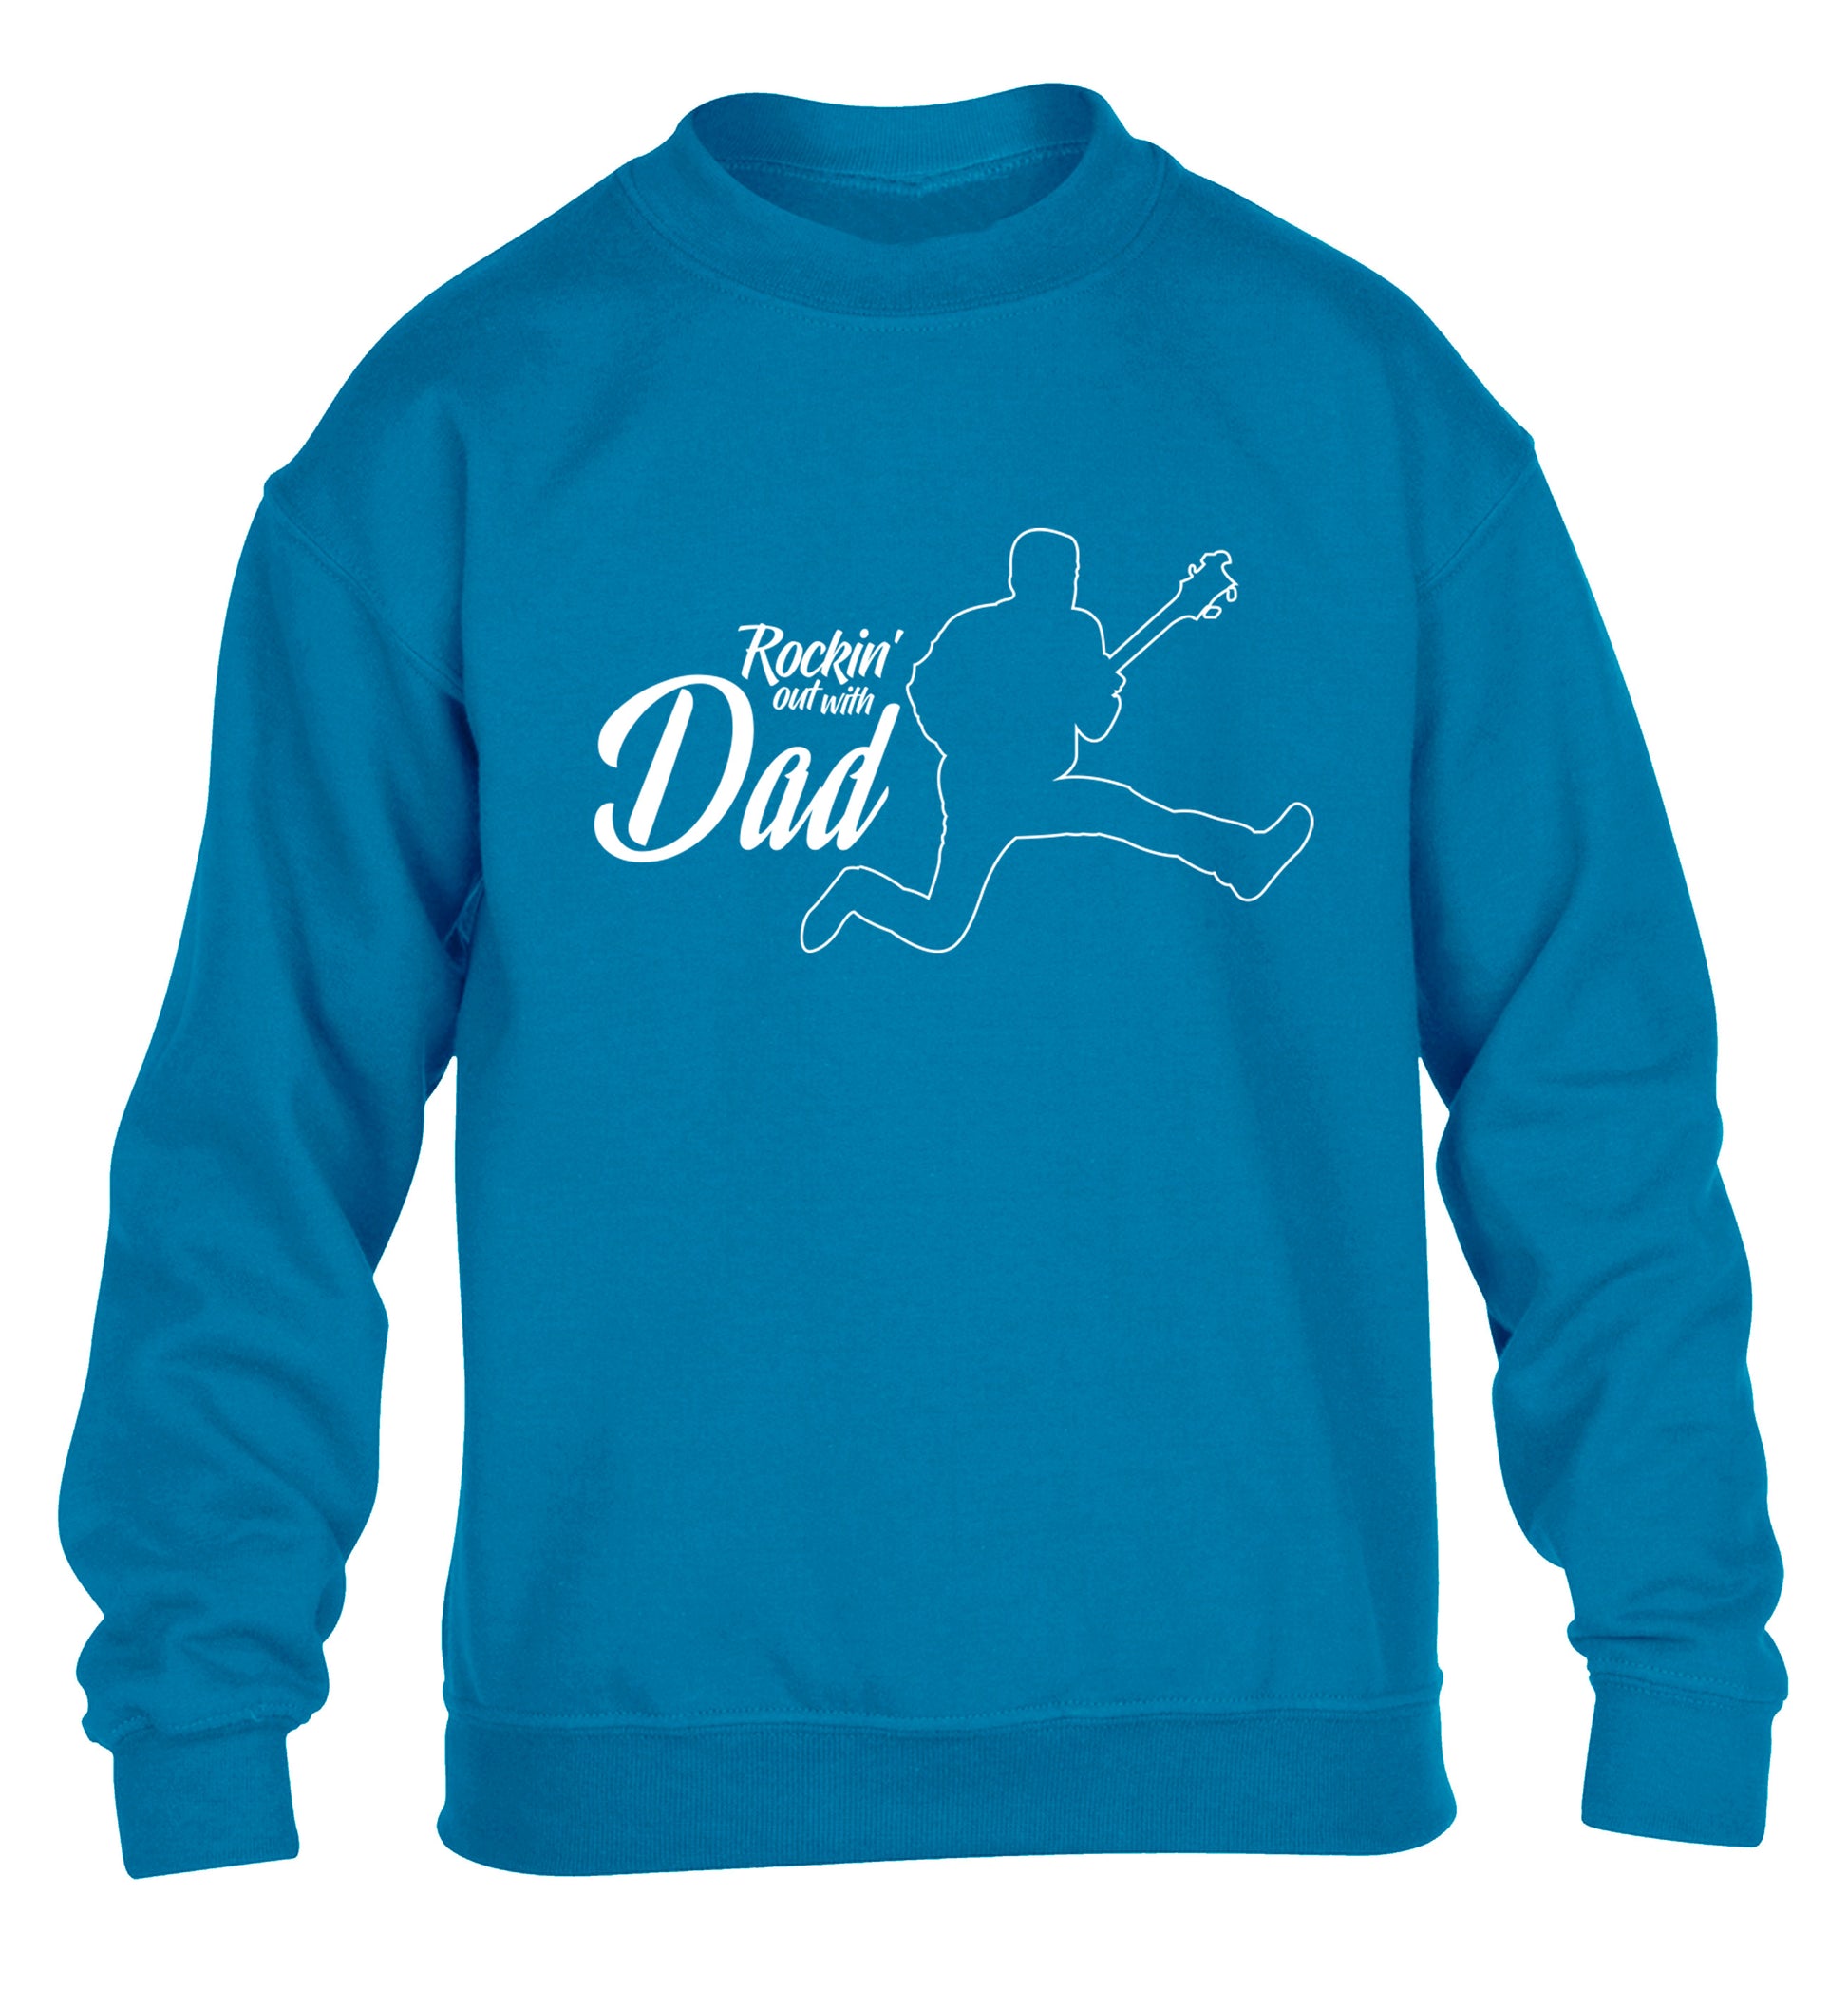 Rockin out with dad children's blue sweater 12-13 Years